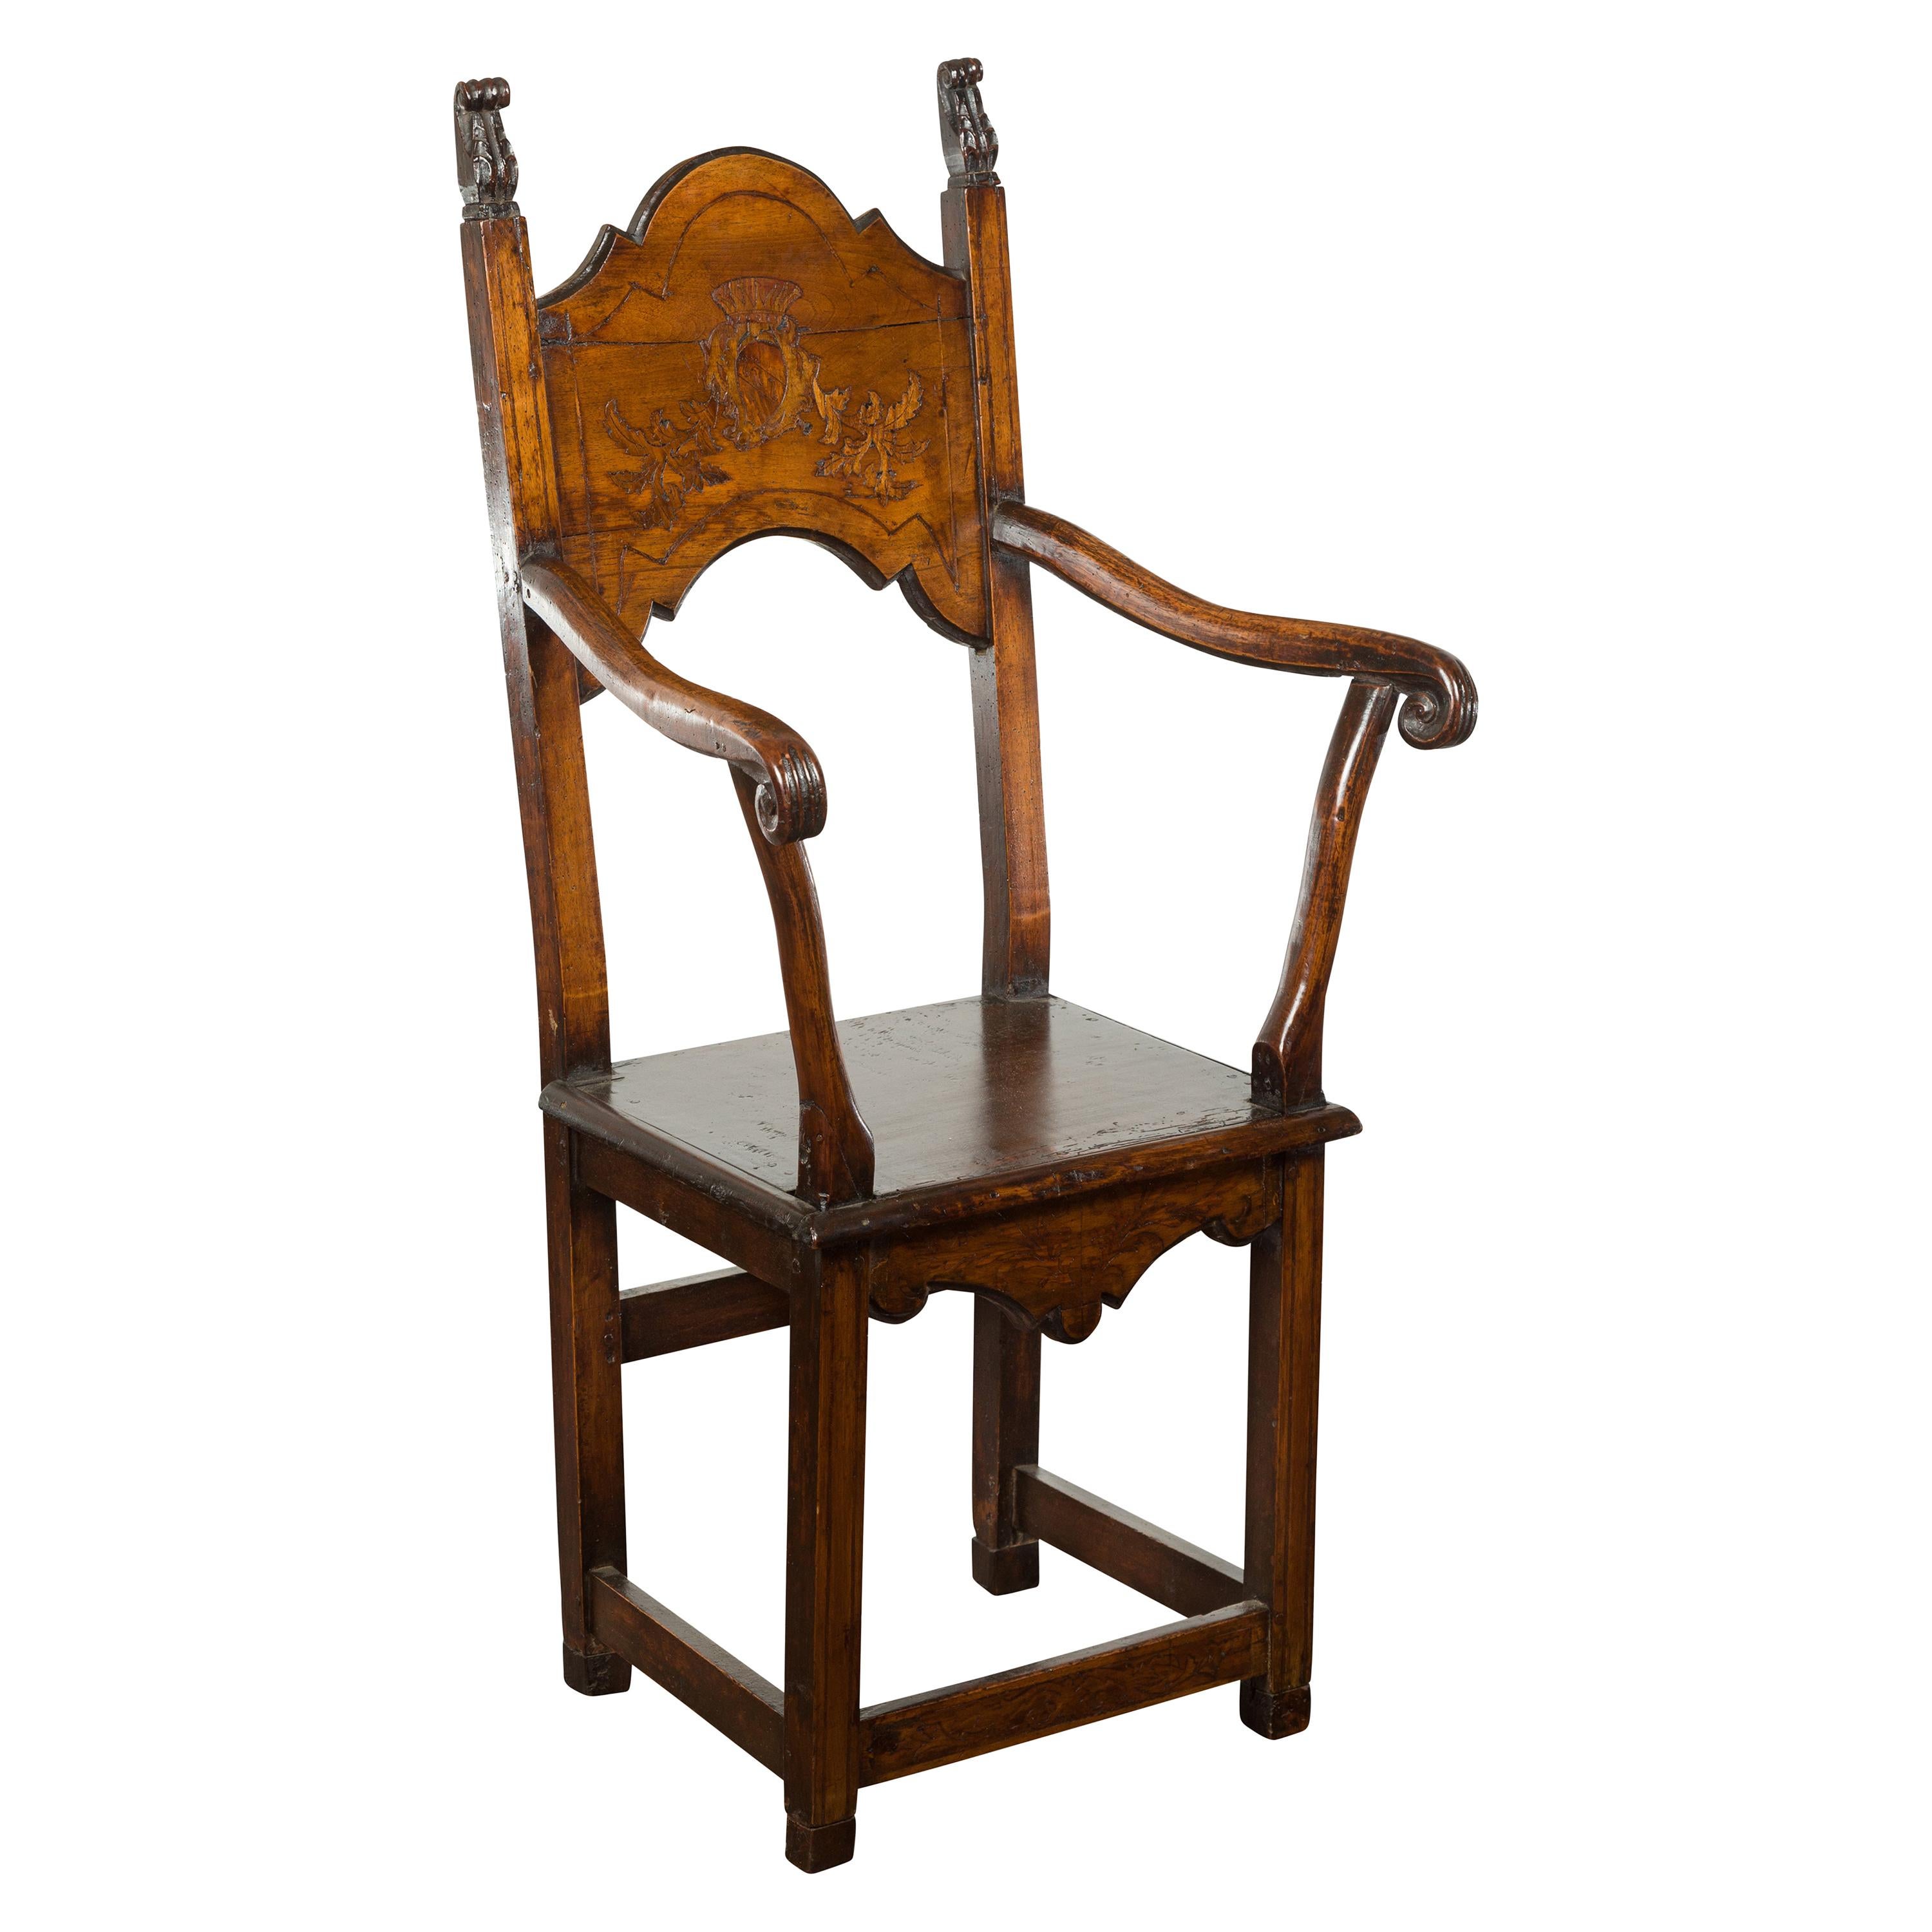 Tall English Georgian Wooden Armchair with Carved Cartouche, circa 1800-1820